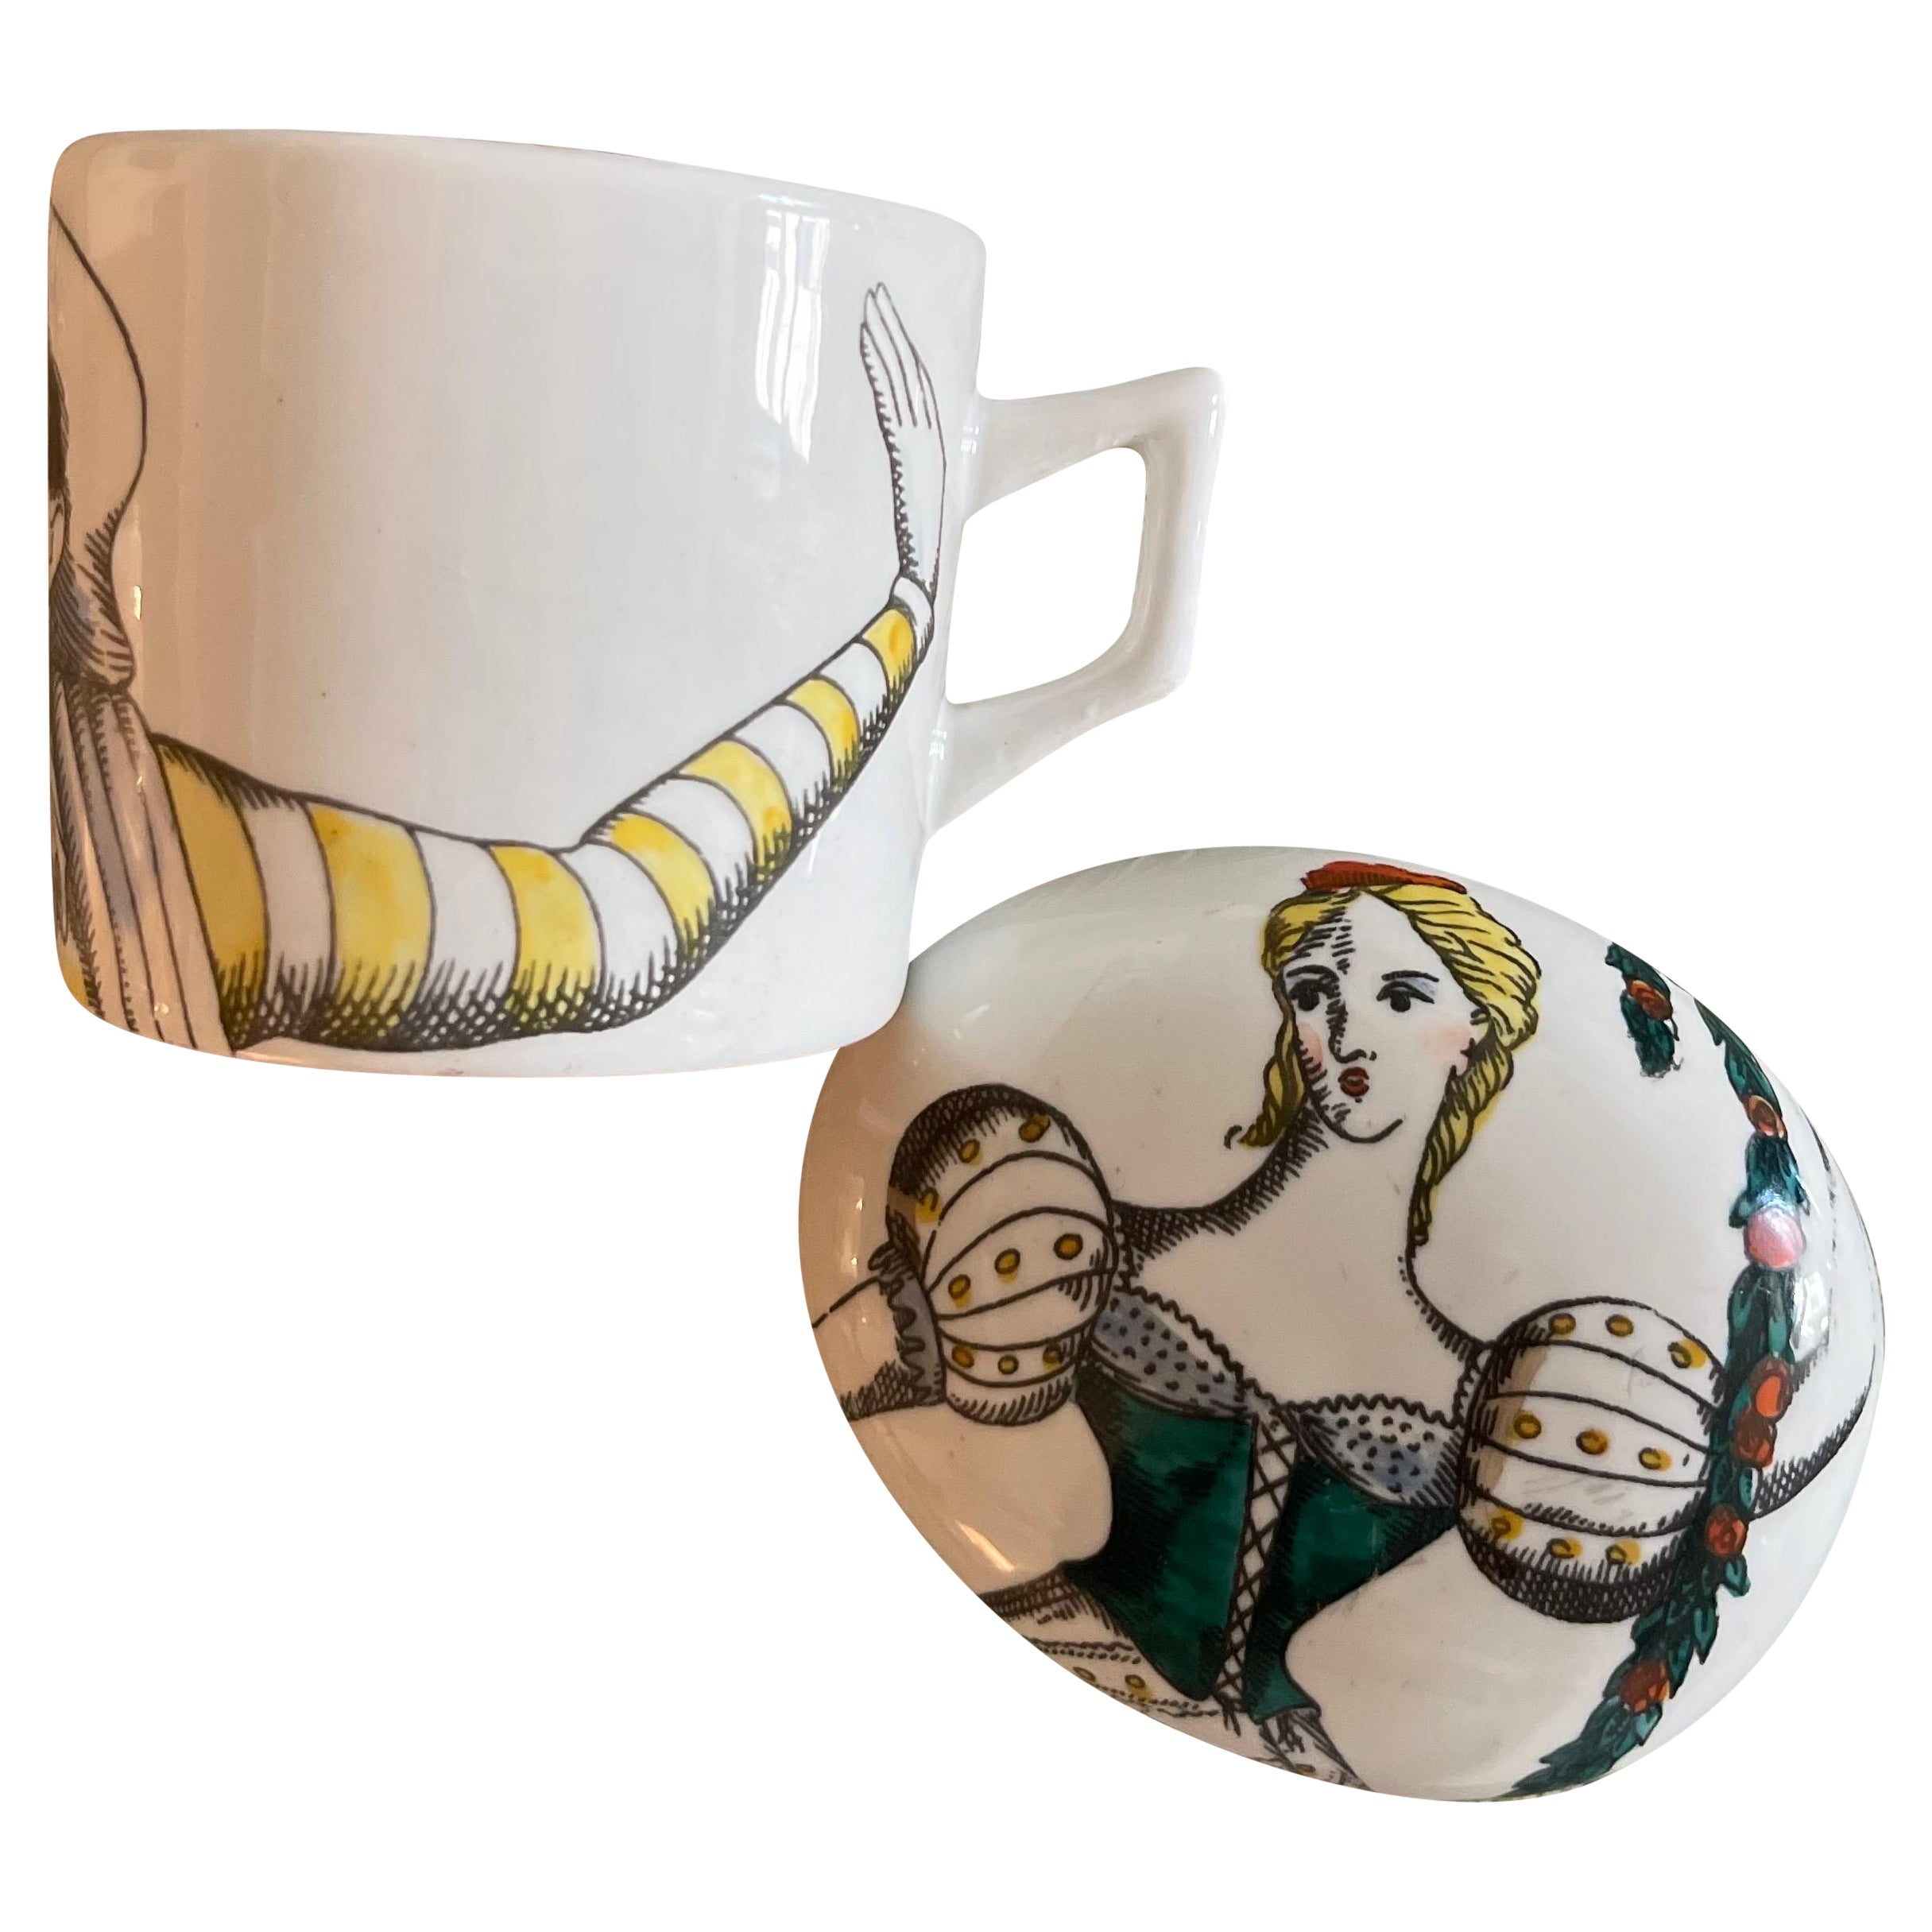 Fornasetti “Commedia” Ceramic Paperweight and Cup Pair For Sale